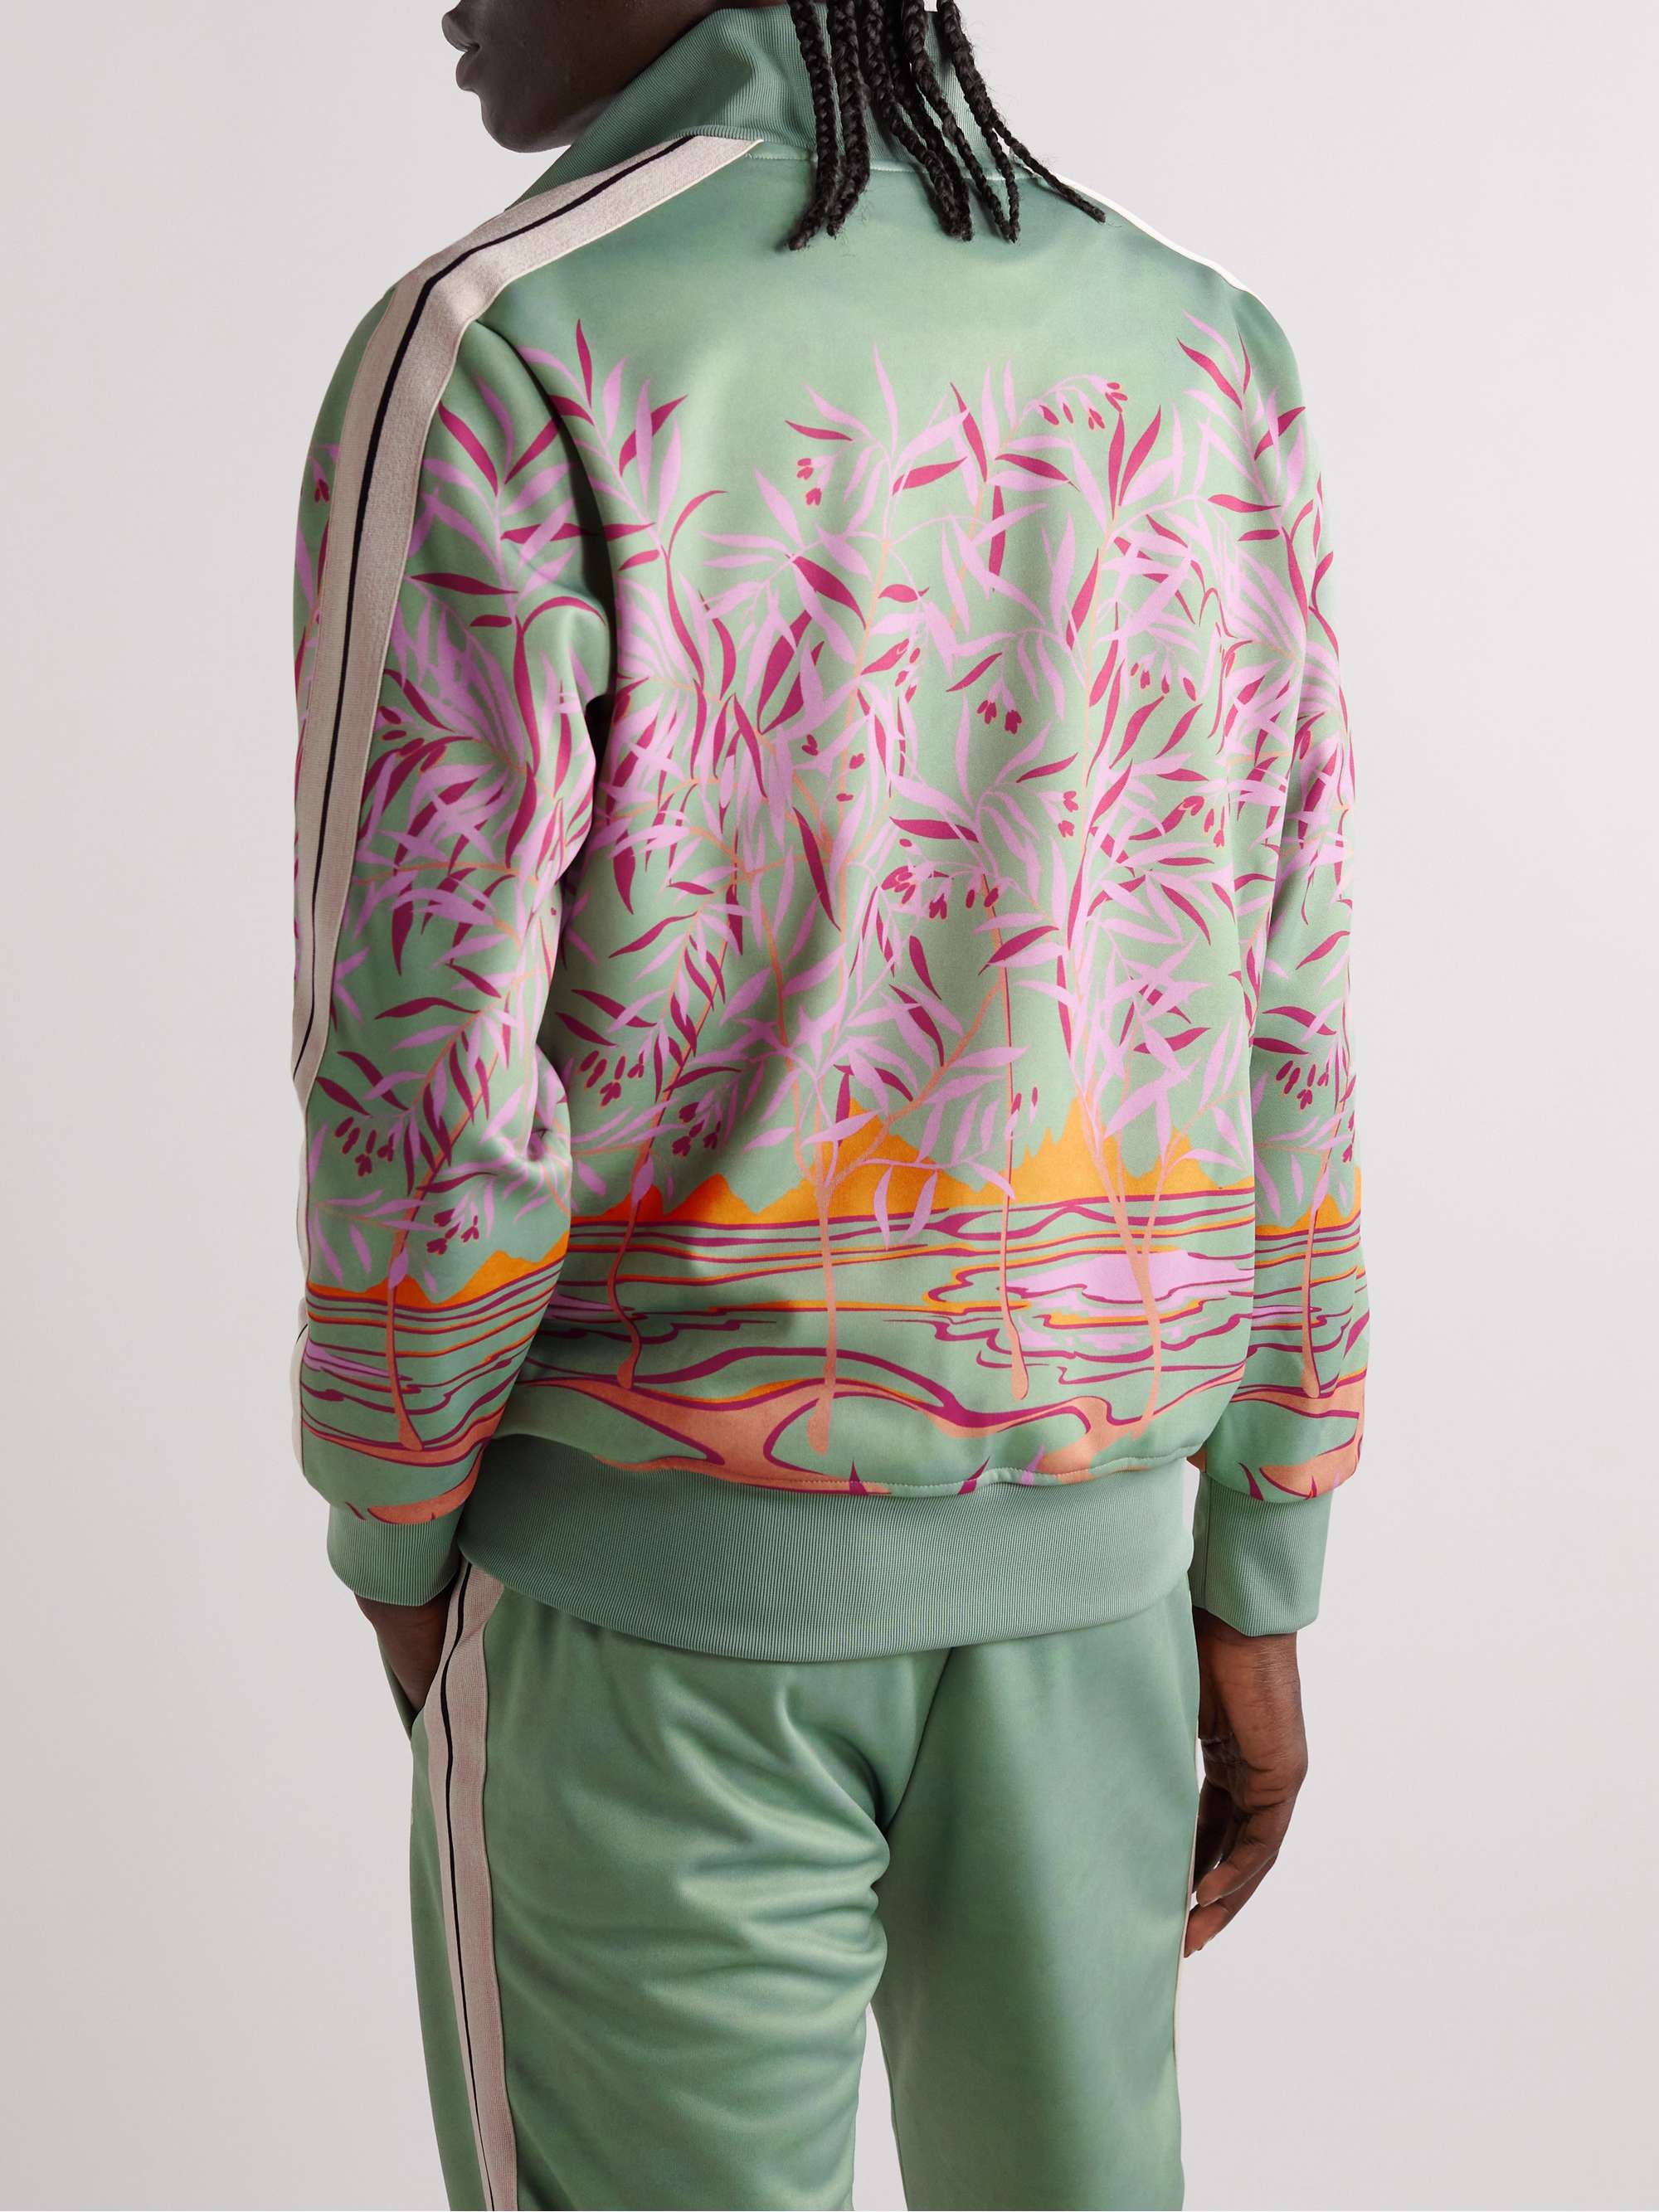 PALM ANGELS Lagoon Slim-Fit Printed Tech-Jersey Track Jacket